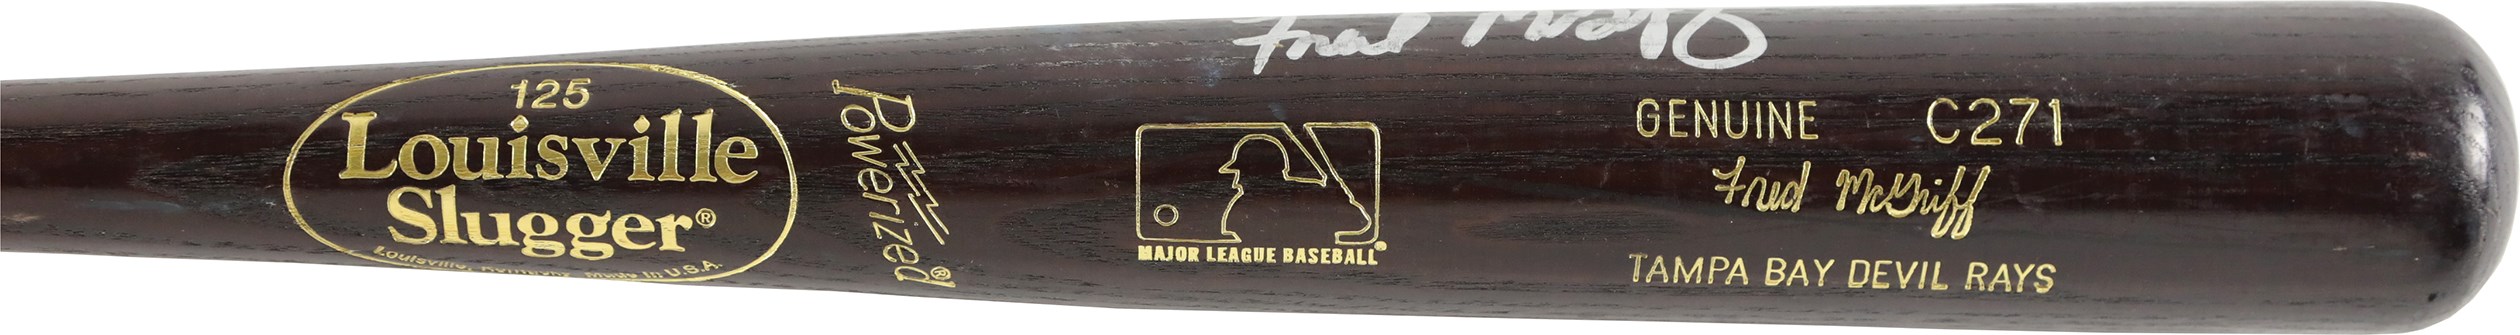 Baseball Equipment - 1998-2000 Fred McGriff Tampa Bay Devil Rays Signed Game Used Bat